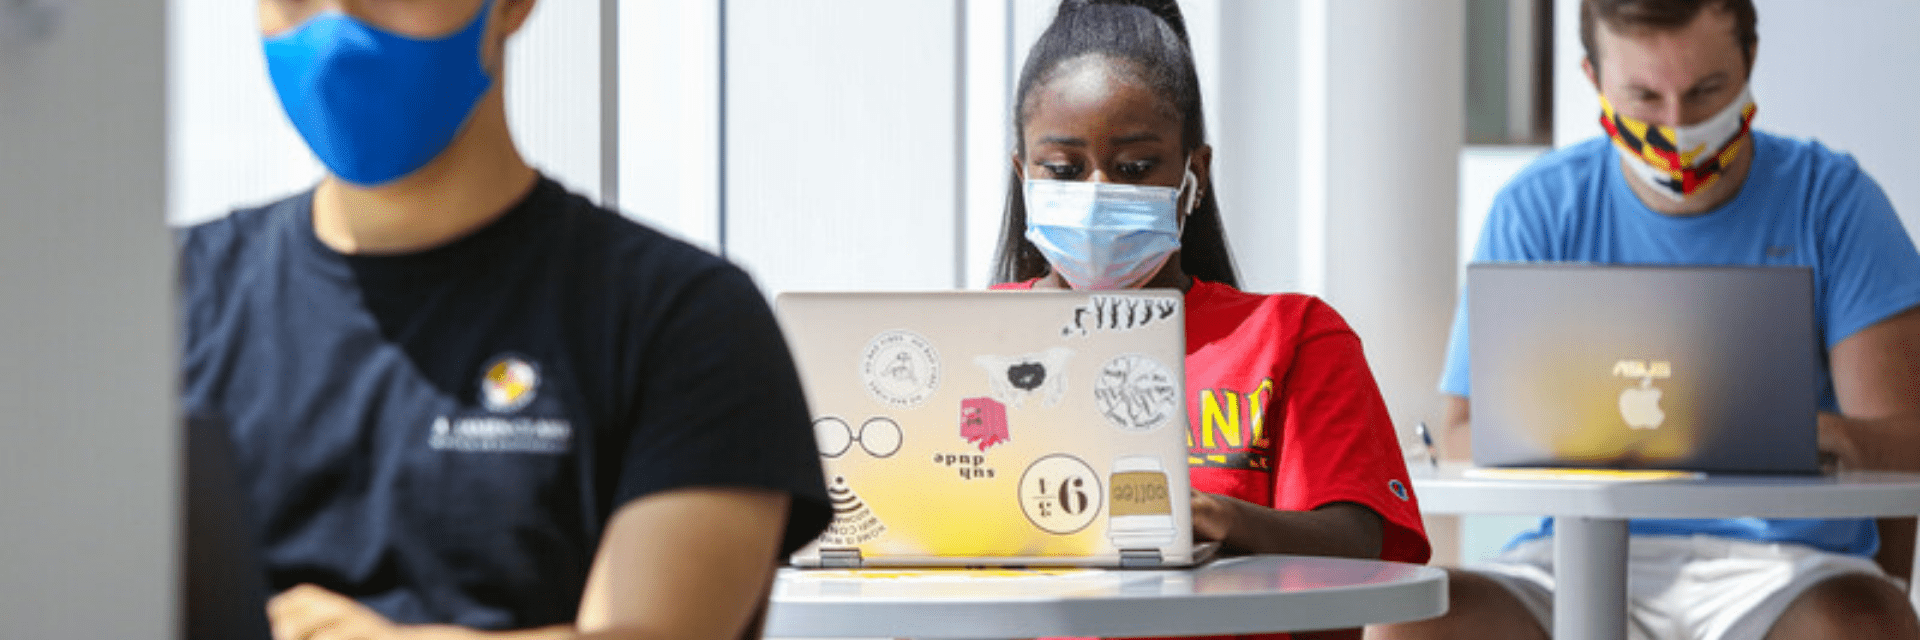 Students on their computers with masks